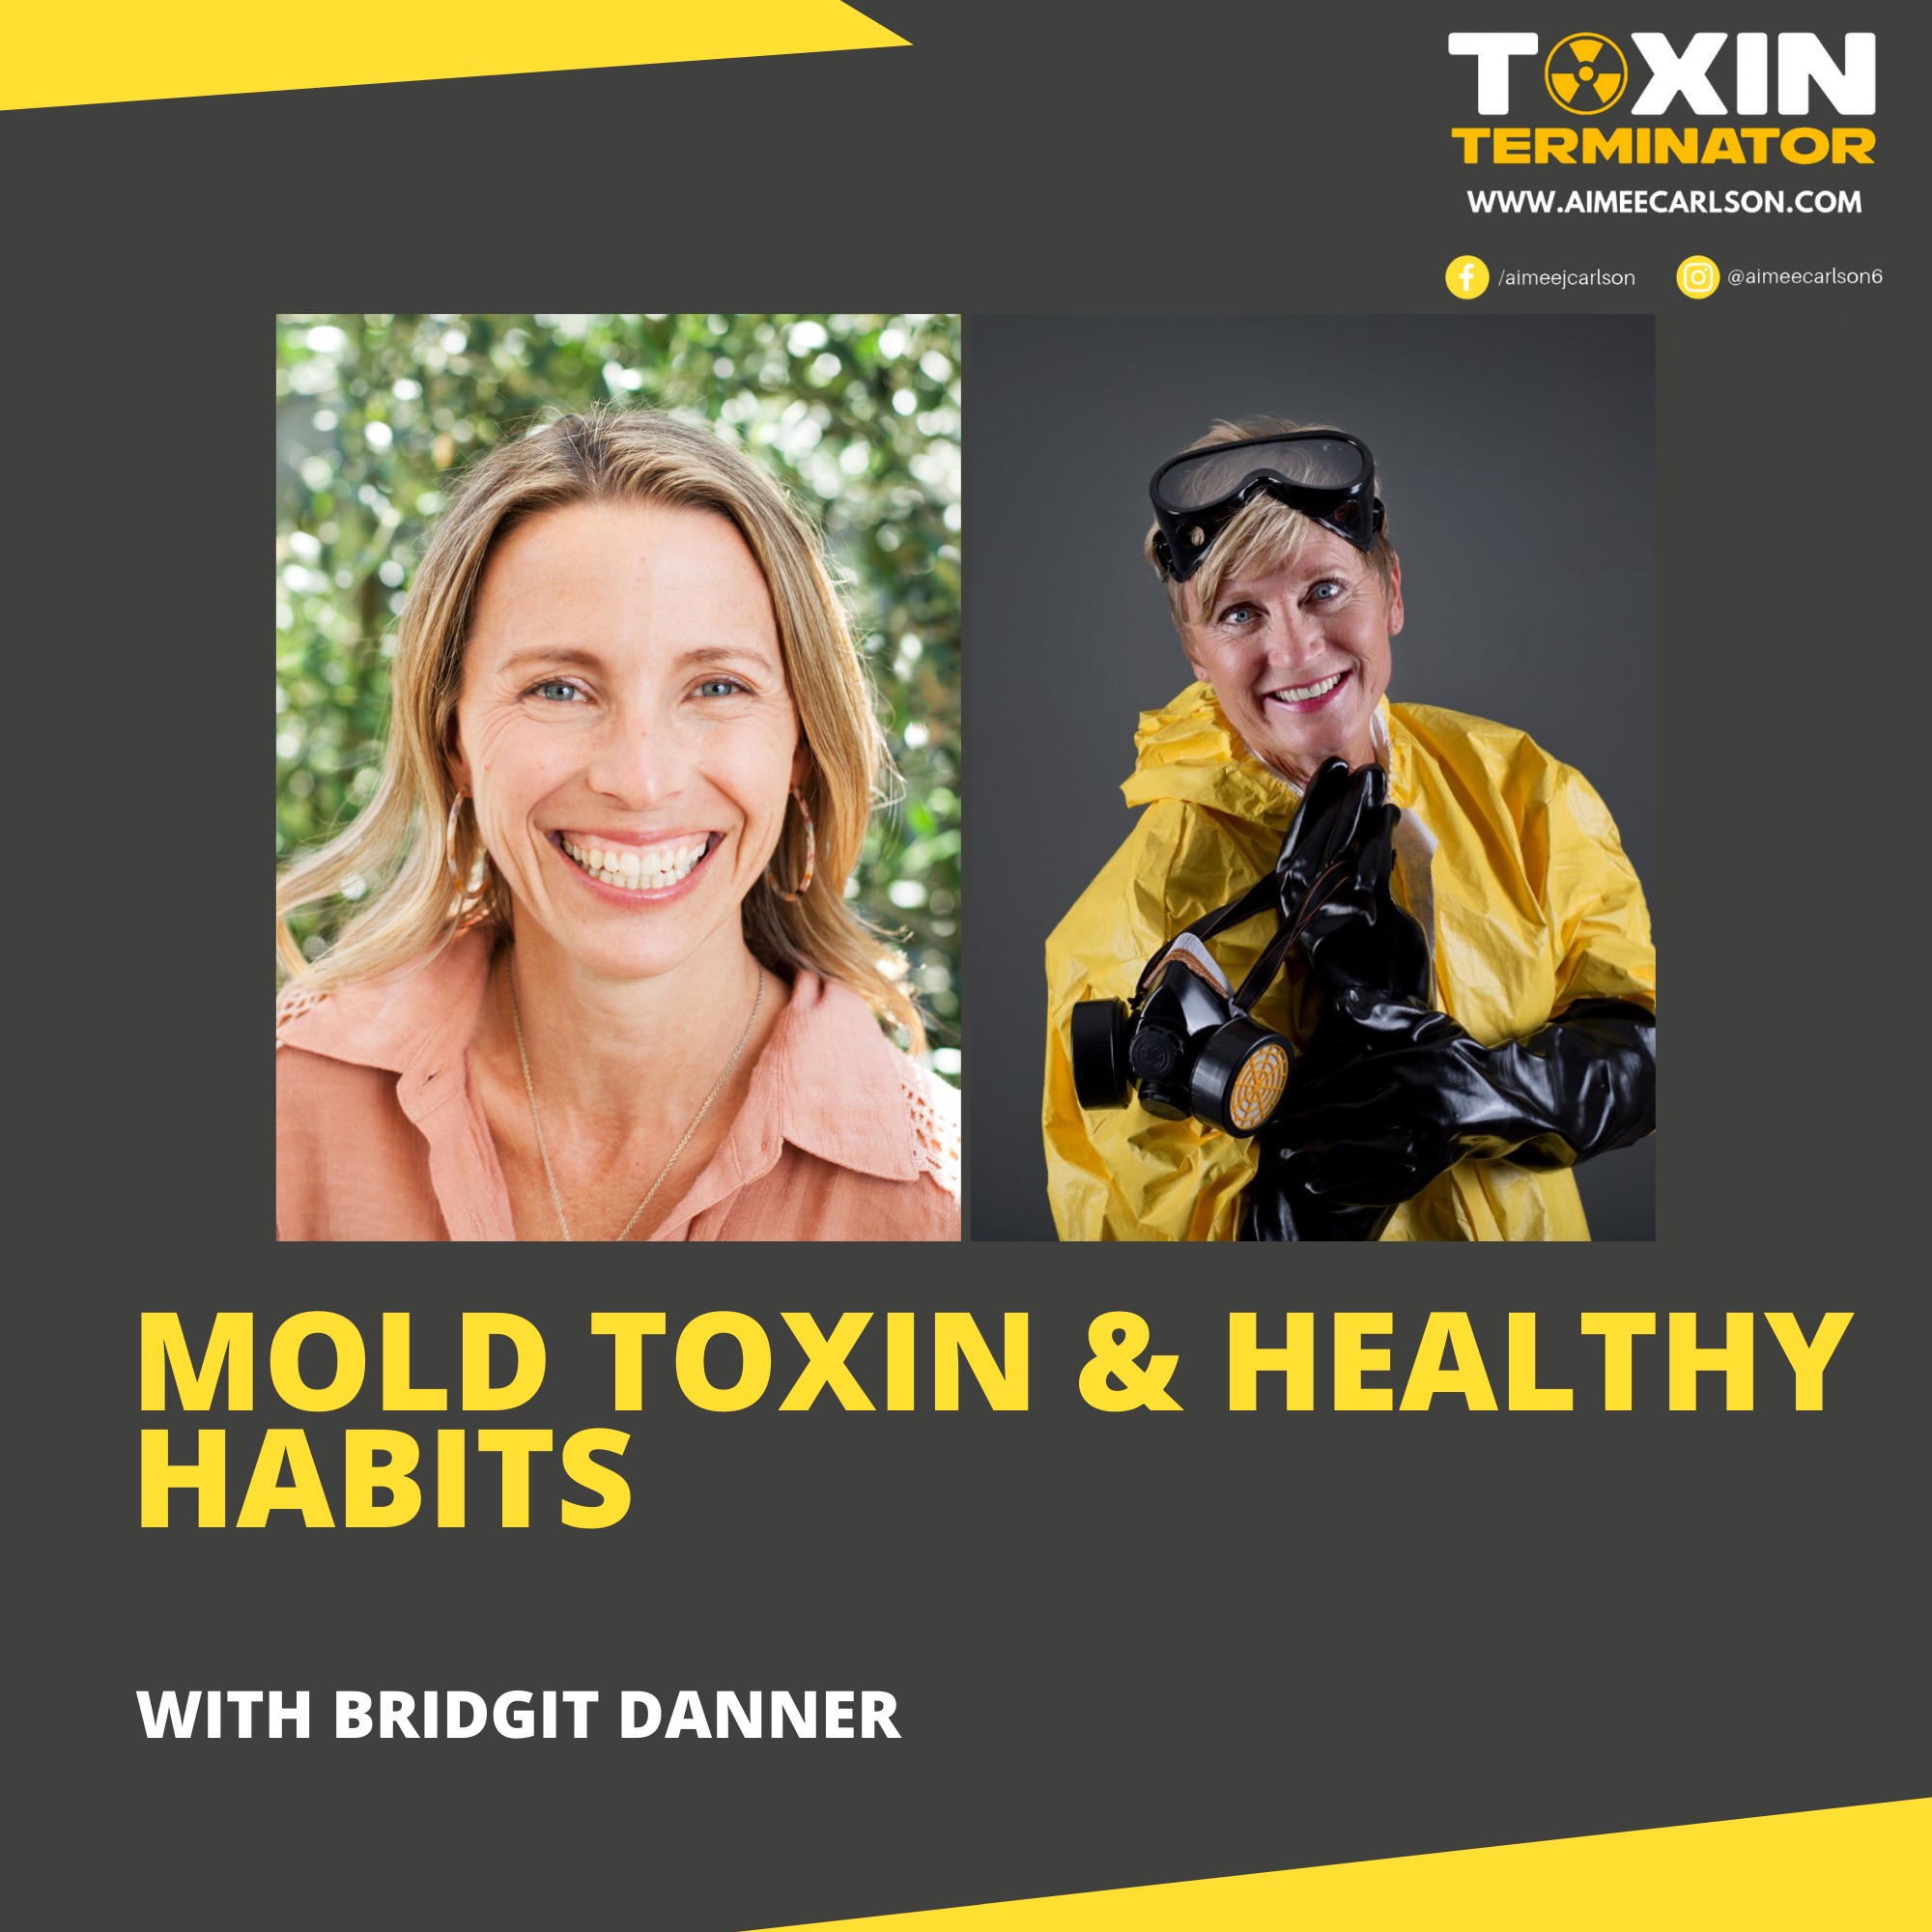 Mold Toxin & Healthy Habits with Bridgit Danner